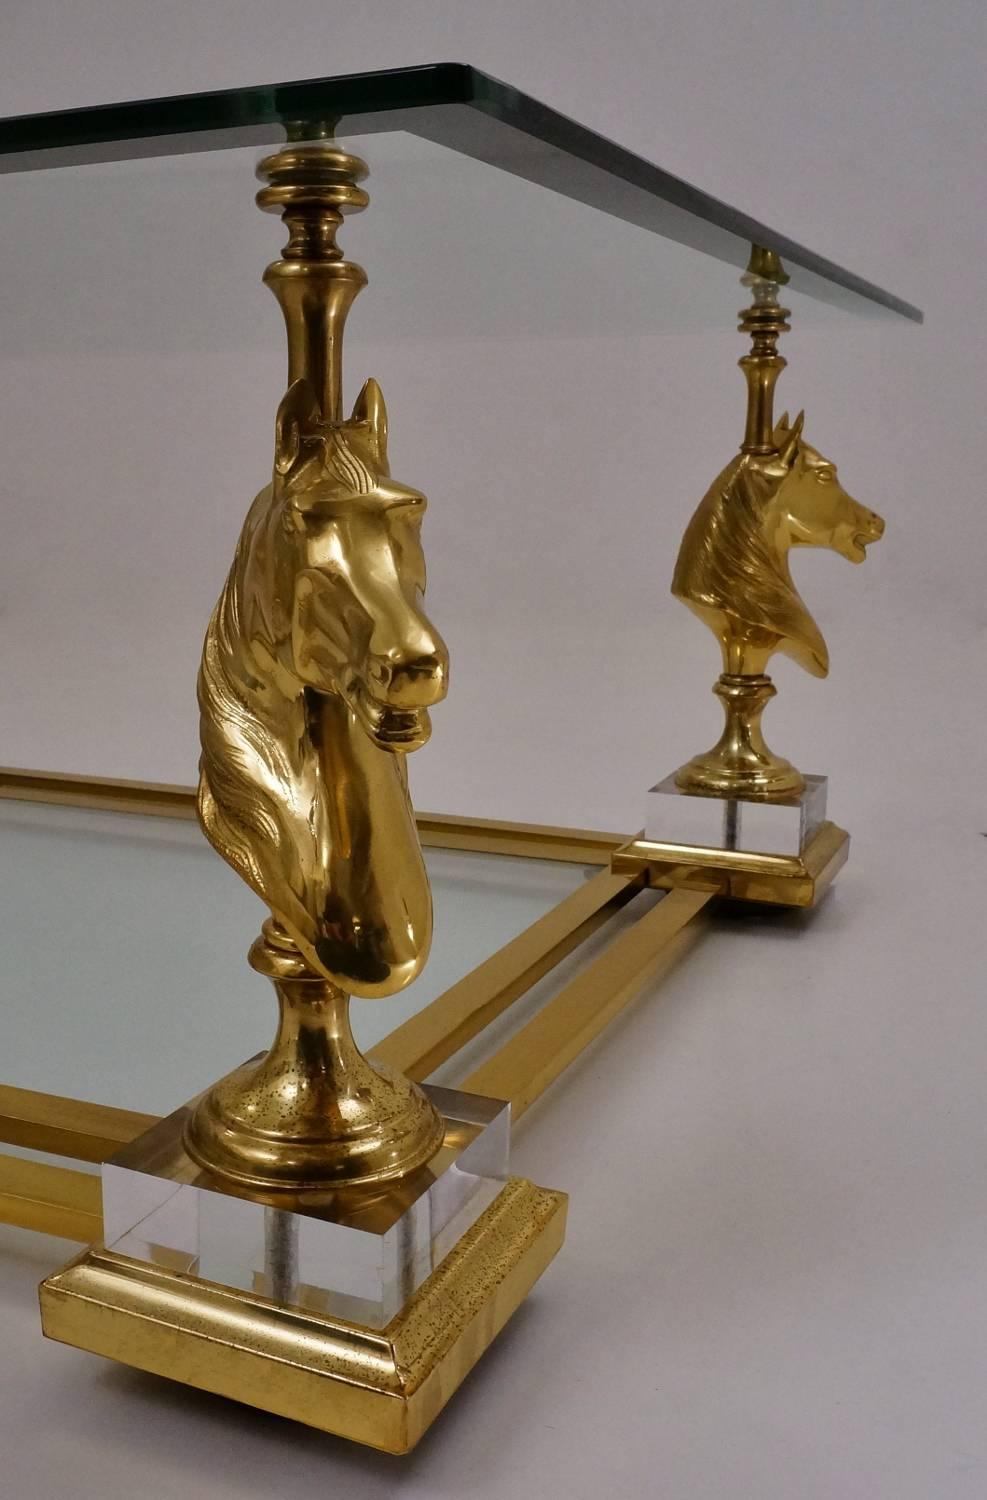 Maison Charles cheval coffee table, brass and Lucite, circa 1970s, French.

This coffee table has been gently cleaned respecting the vintage patina, it is ready to use.

This vintage coffee table with solid brass horse head columns and